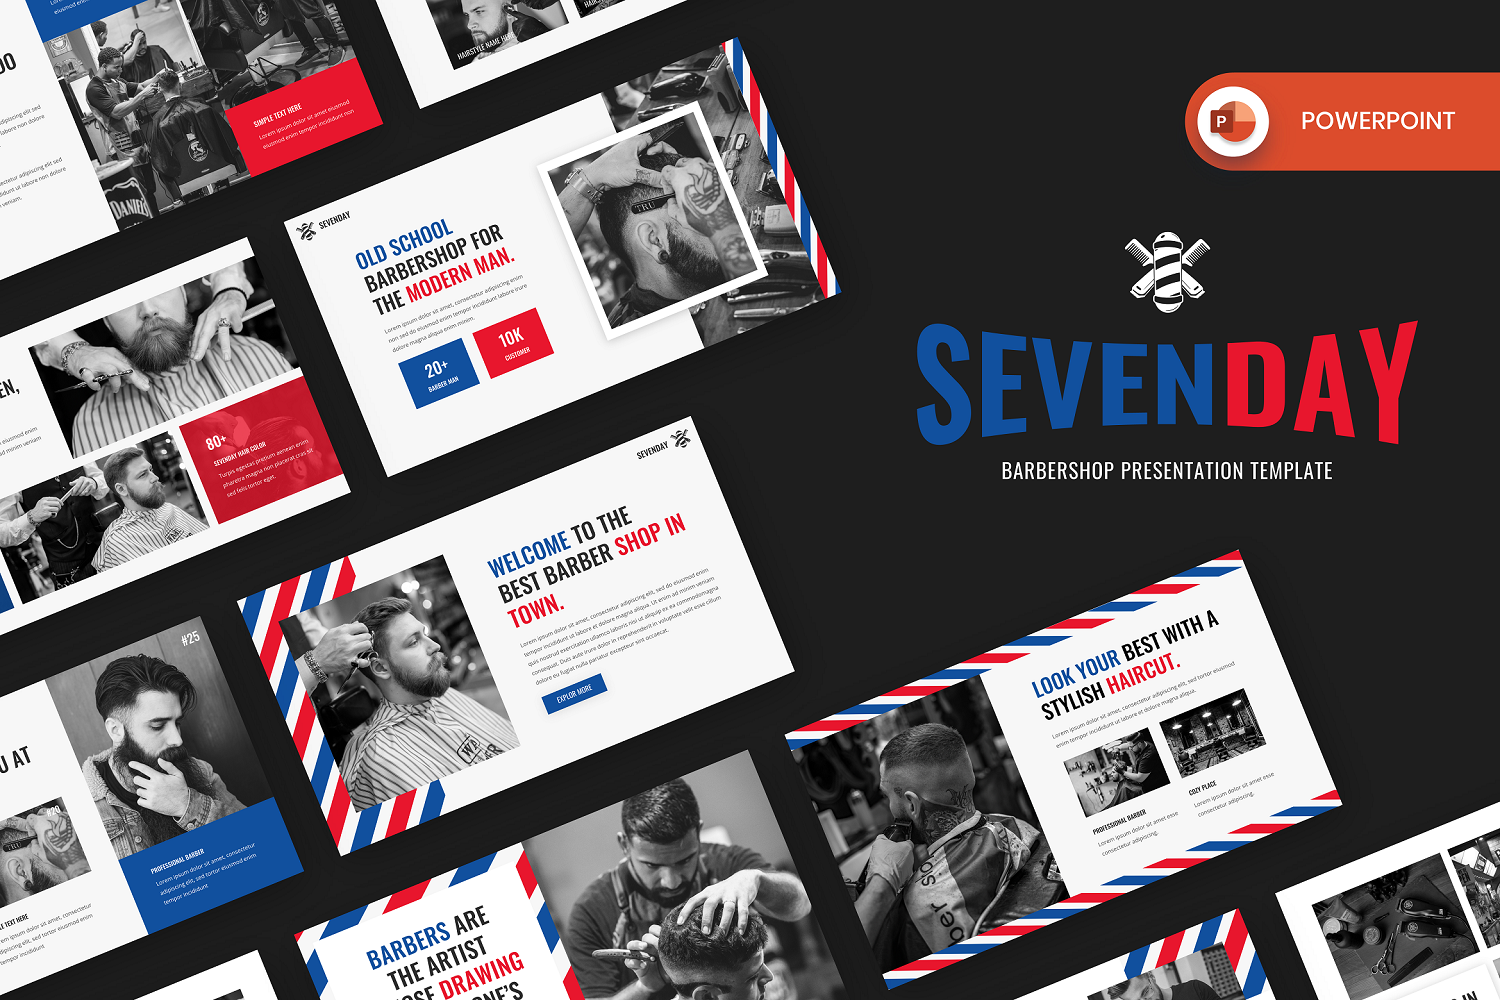 Sevenday - Barbershop PowerPoint Template